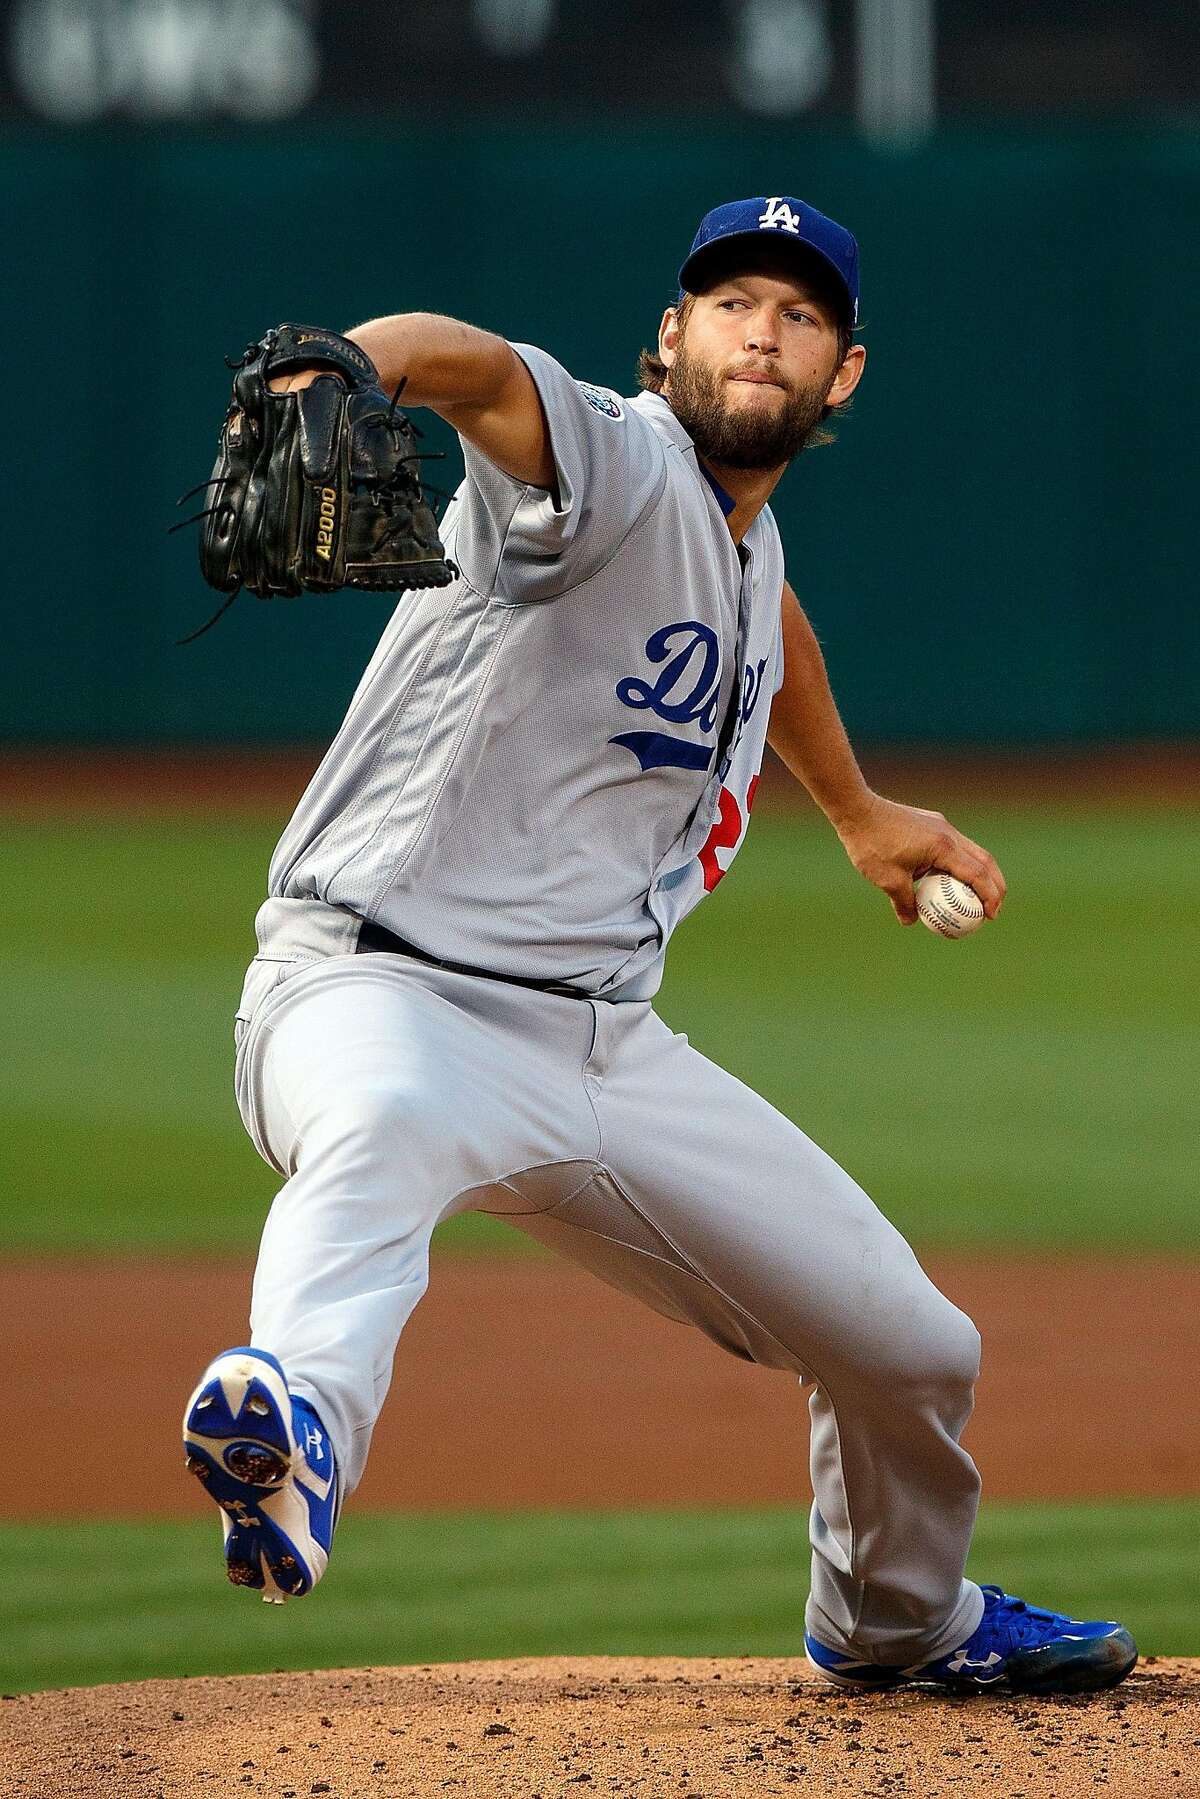 OAKLAND, CA - AUGUST 08: Clayton Kershaw #22 of the Los Angeles Dodgers pitches against the Oakland Athletics during the first inning at the Oakland Coliseum on August 8, 2018 in Oakland, California. (Photo by Jason O. Watson/Getty Images)